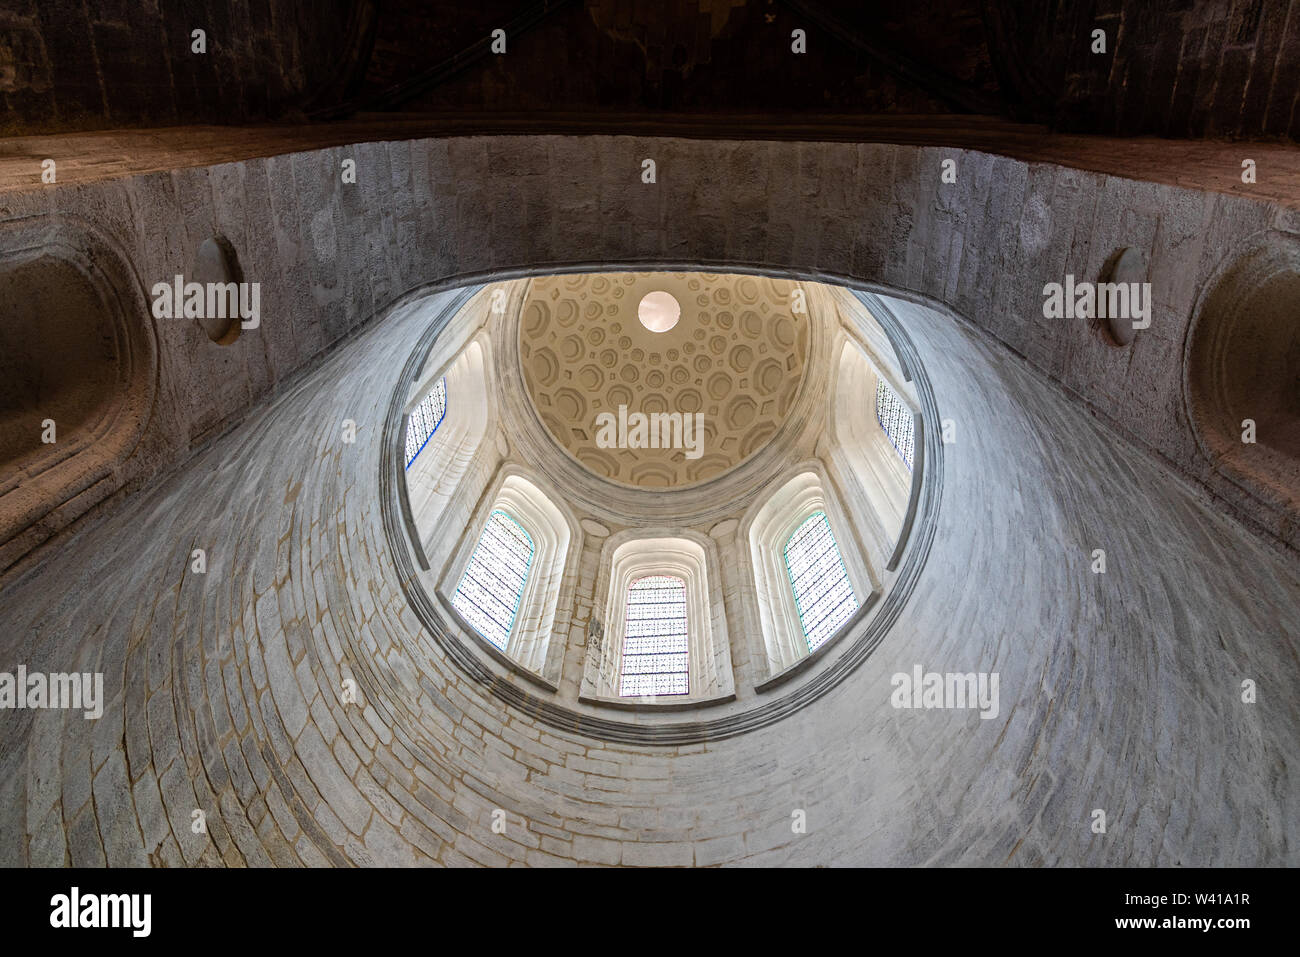 Vannes, France - August 6, 2018: Direcly below view of the dome of the chapel of St. Vincent Ferrer in the Cathedral of Vannes. It is a Roman Catholic Stock Photo